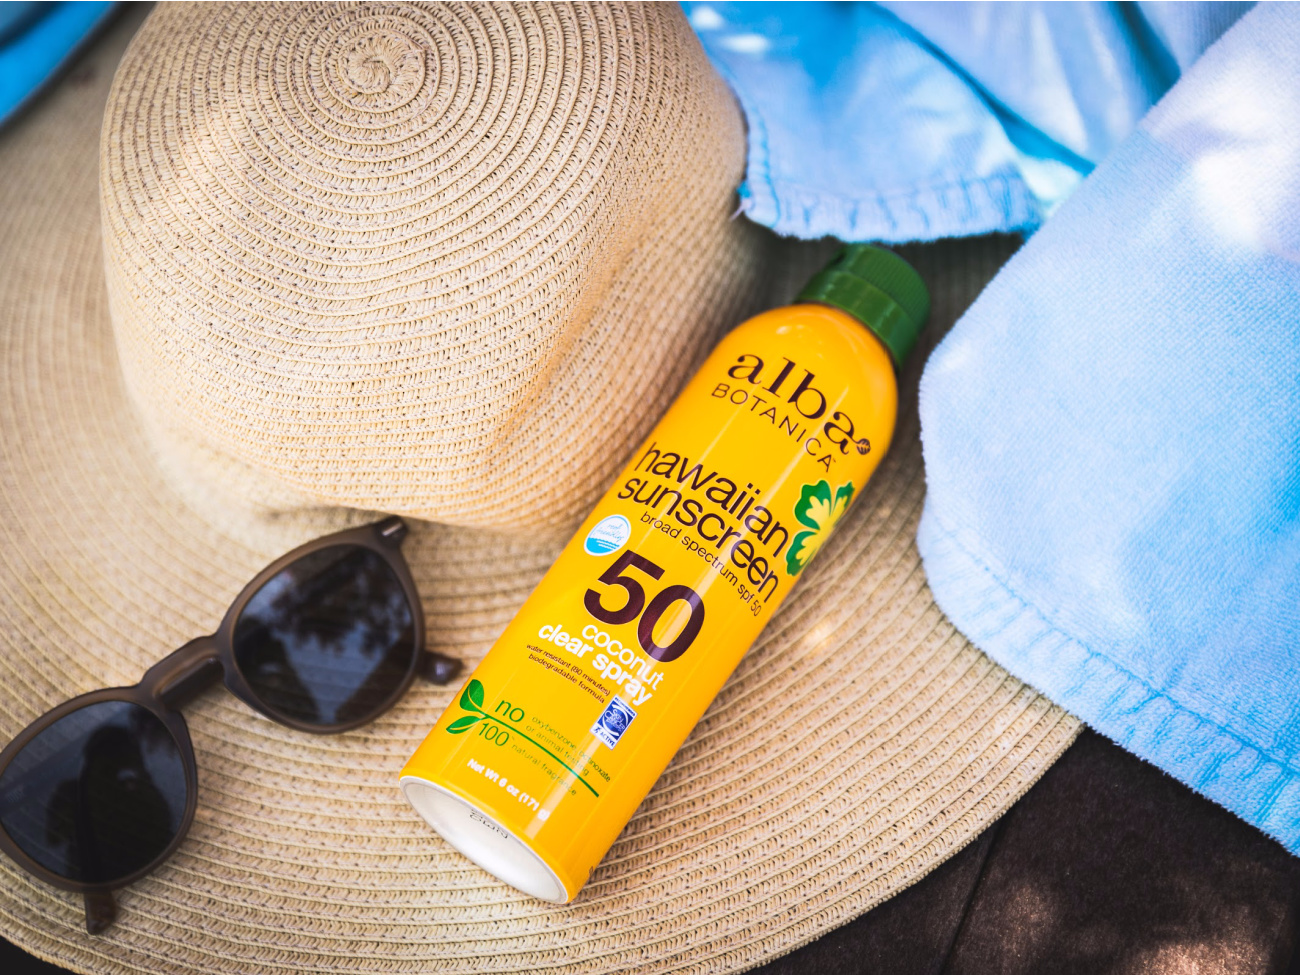 Still Time To Grab A Discount On Alba Botanica Suncare At Your Local Publix